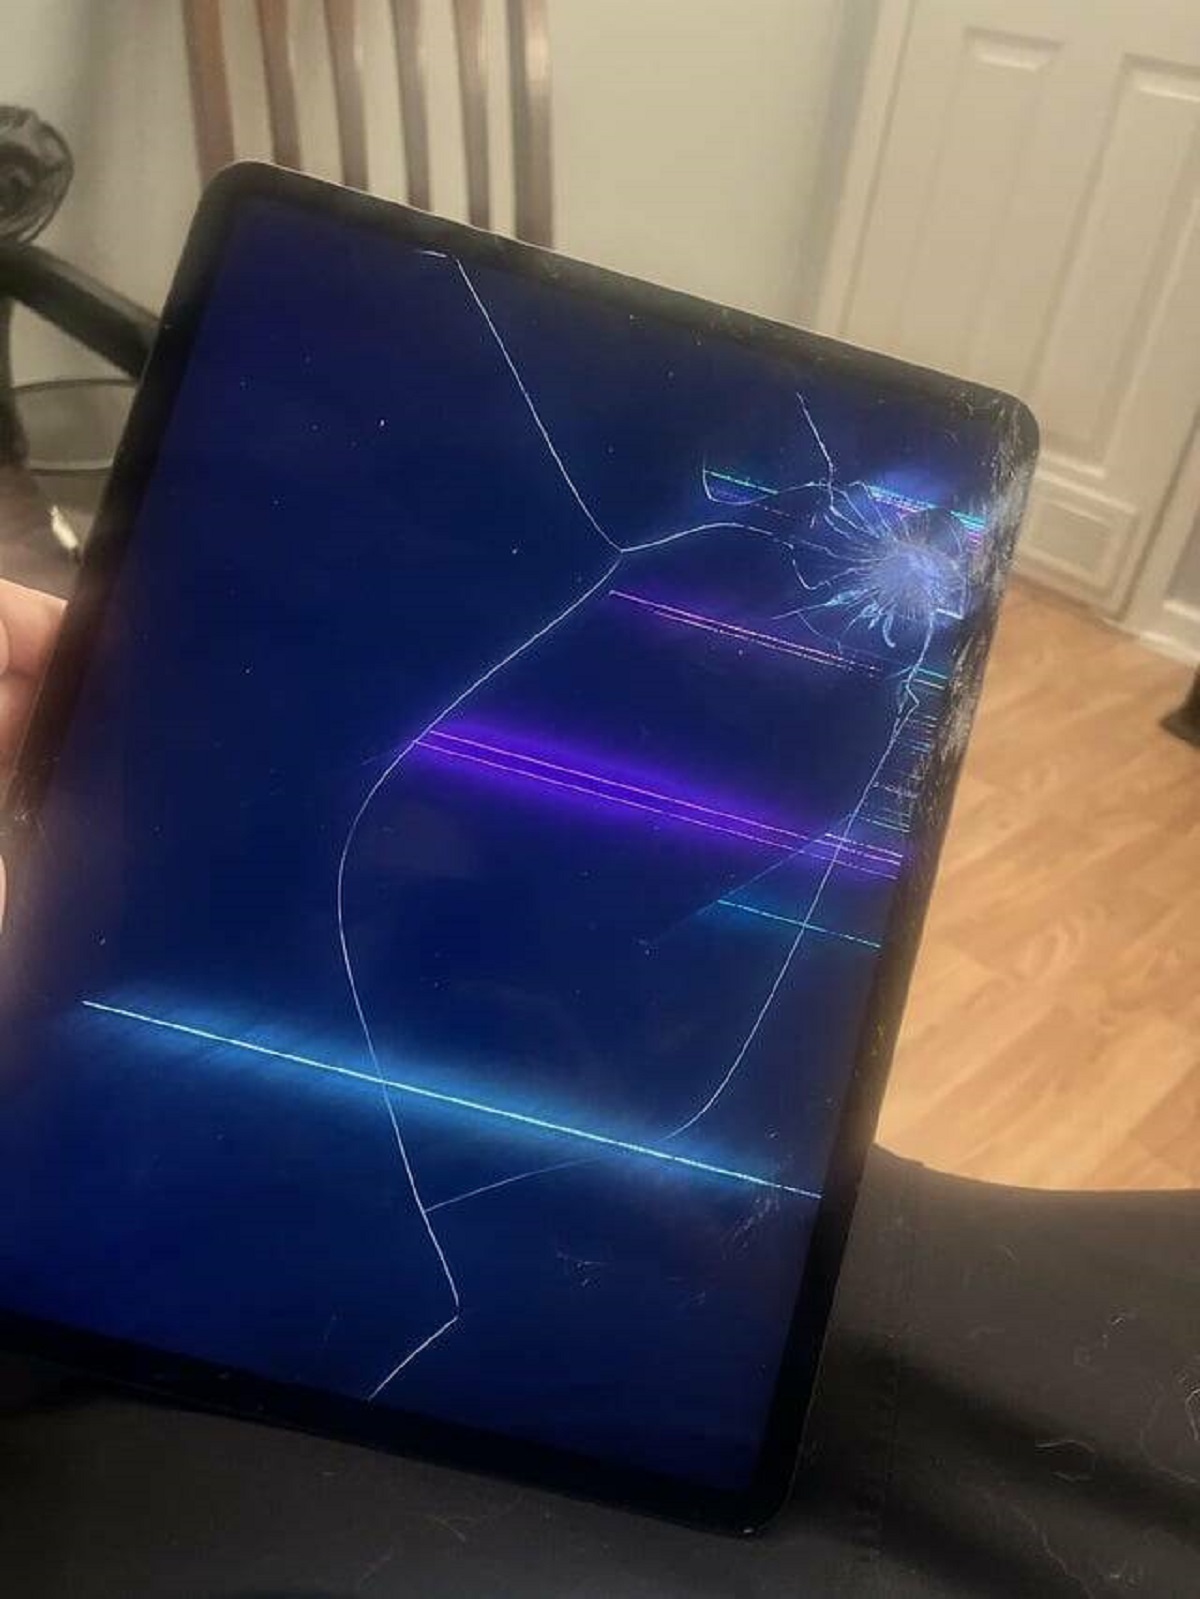 "I was making brunch for the family, iPad sitting on a side table…my two huskies got crazy, knocked it on the floor without me noticing because I was in the other room, it slid under my wife’s recliner. She body slammed into her chair because she was excited for brunch, it rocked back with immense force, and bye bye iPad"